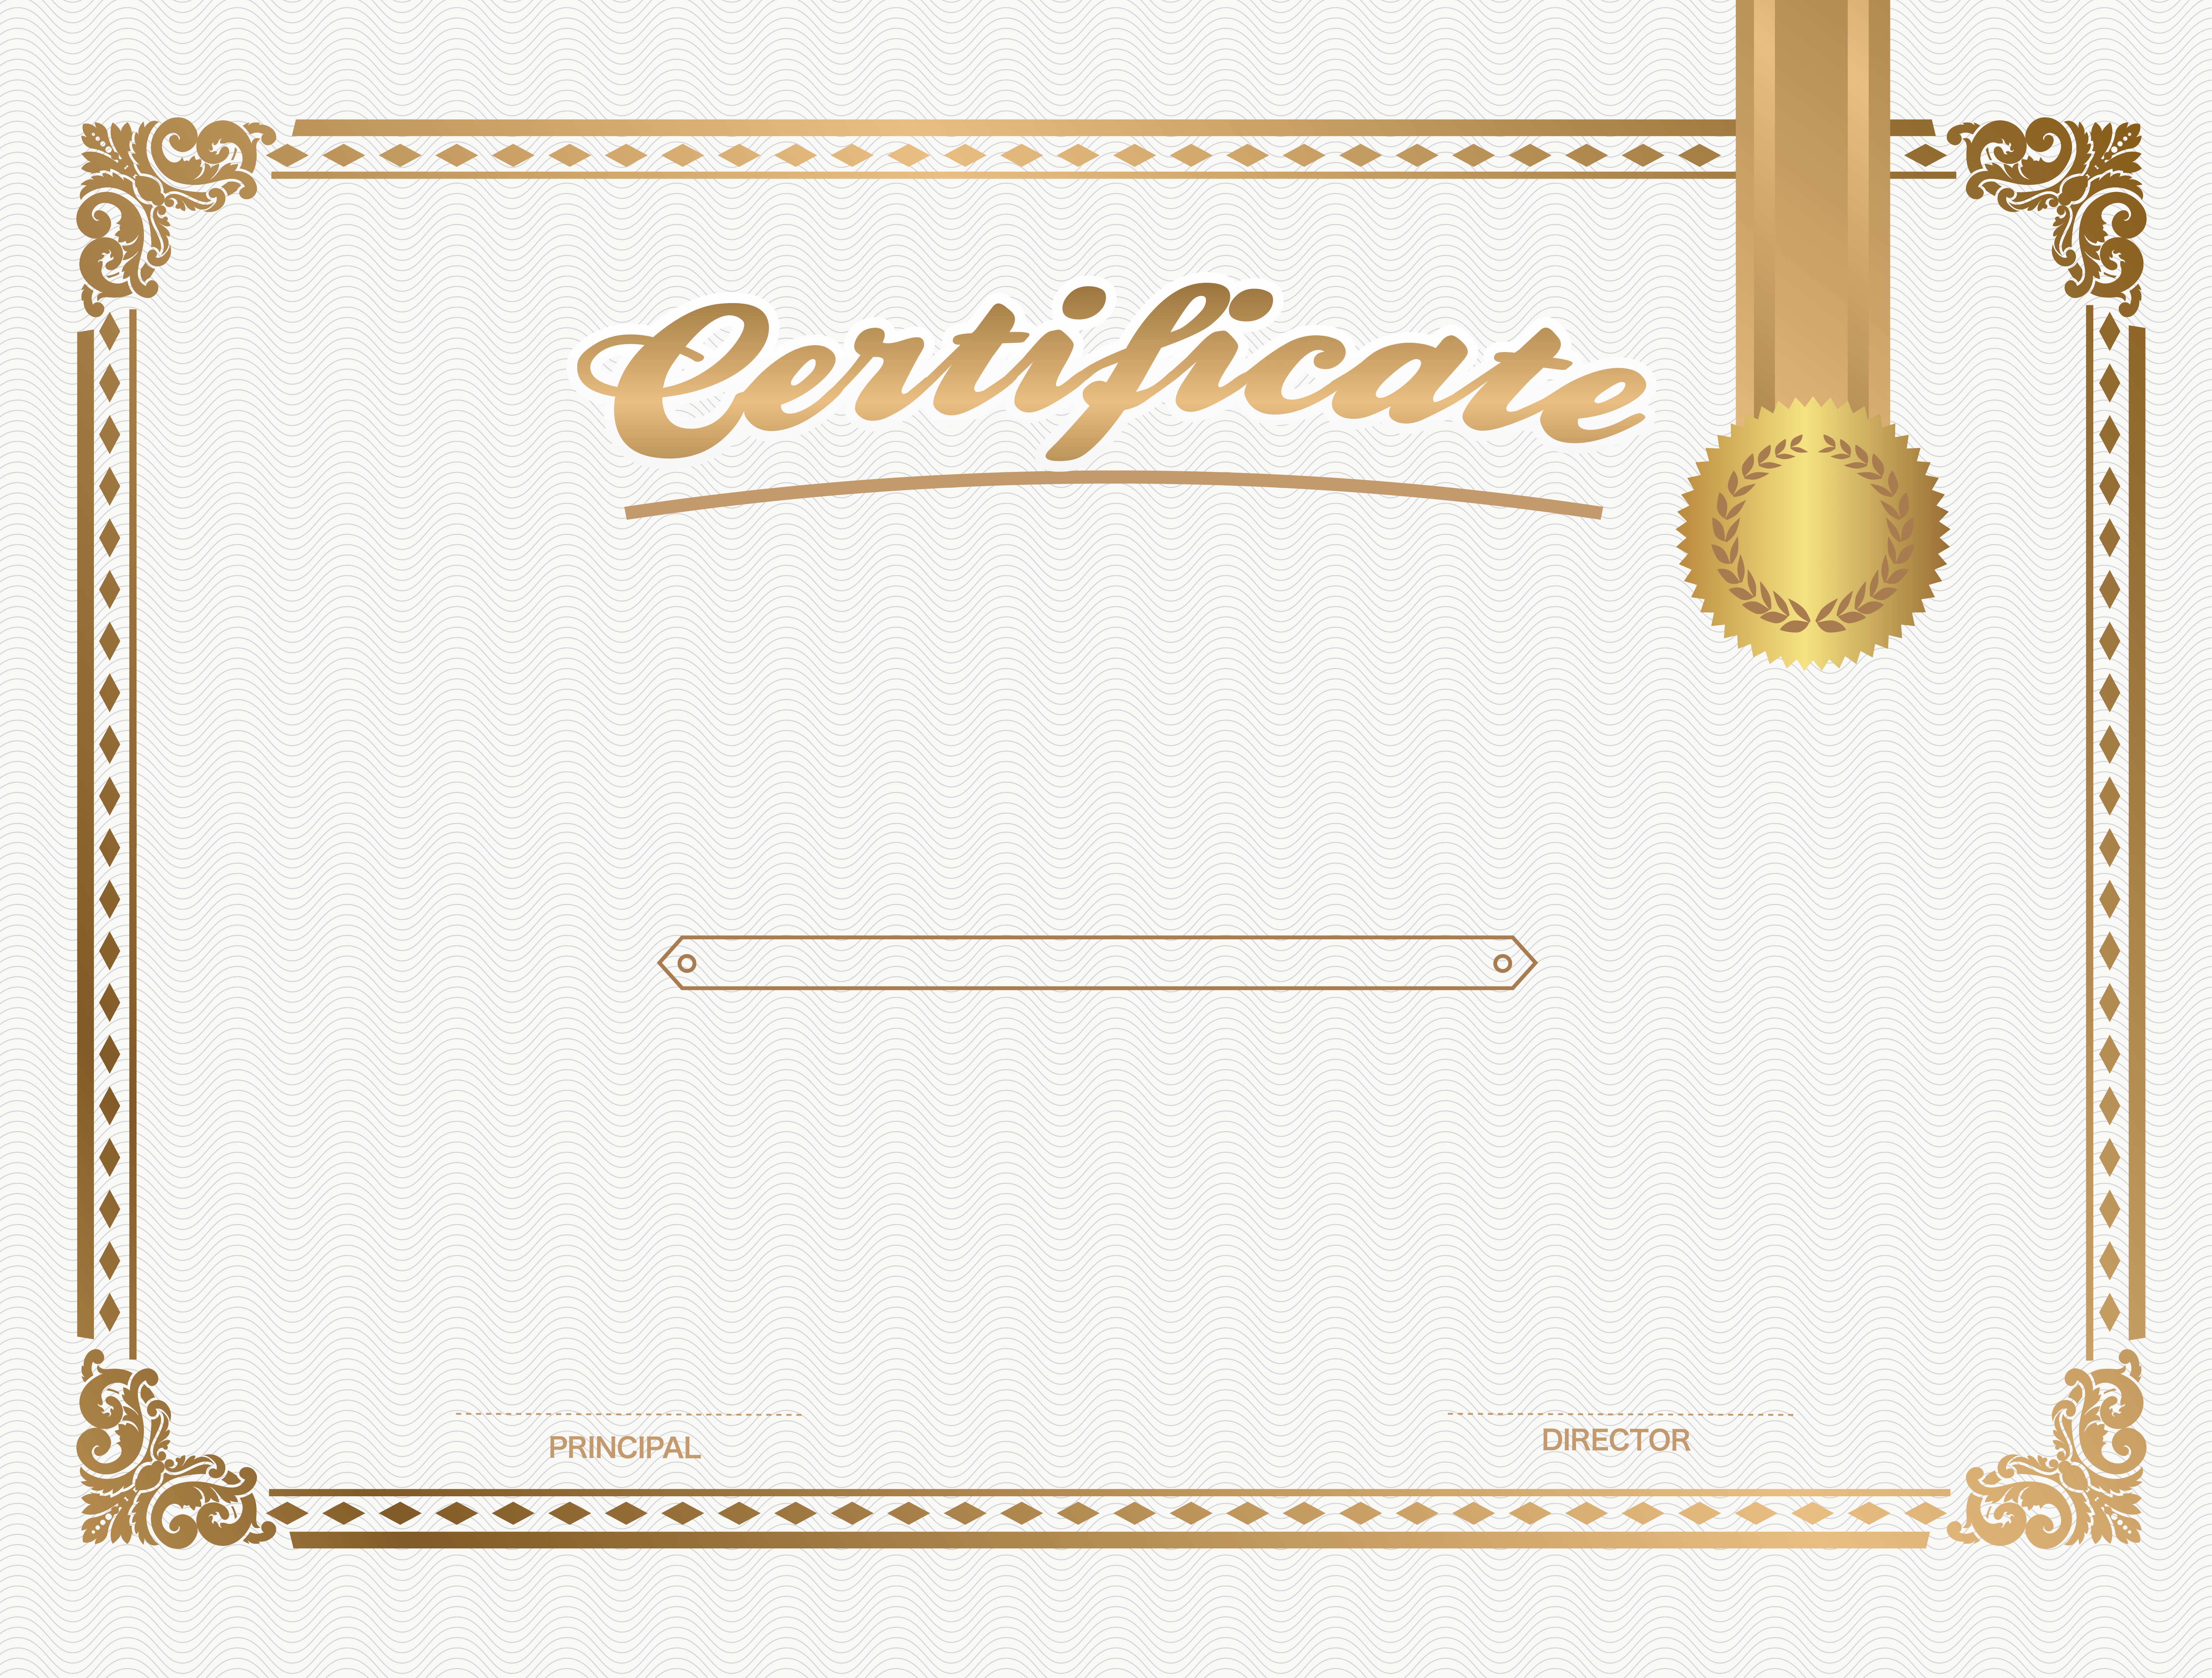 White Certificate PNG Image